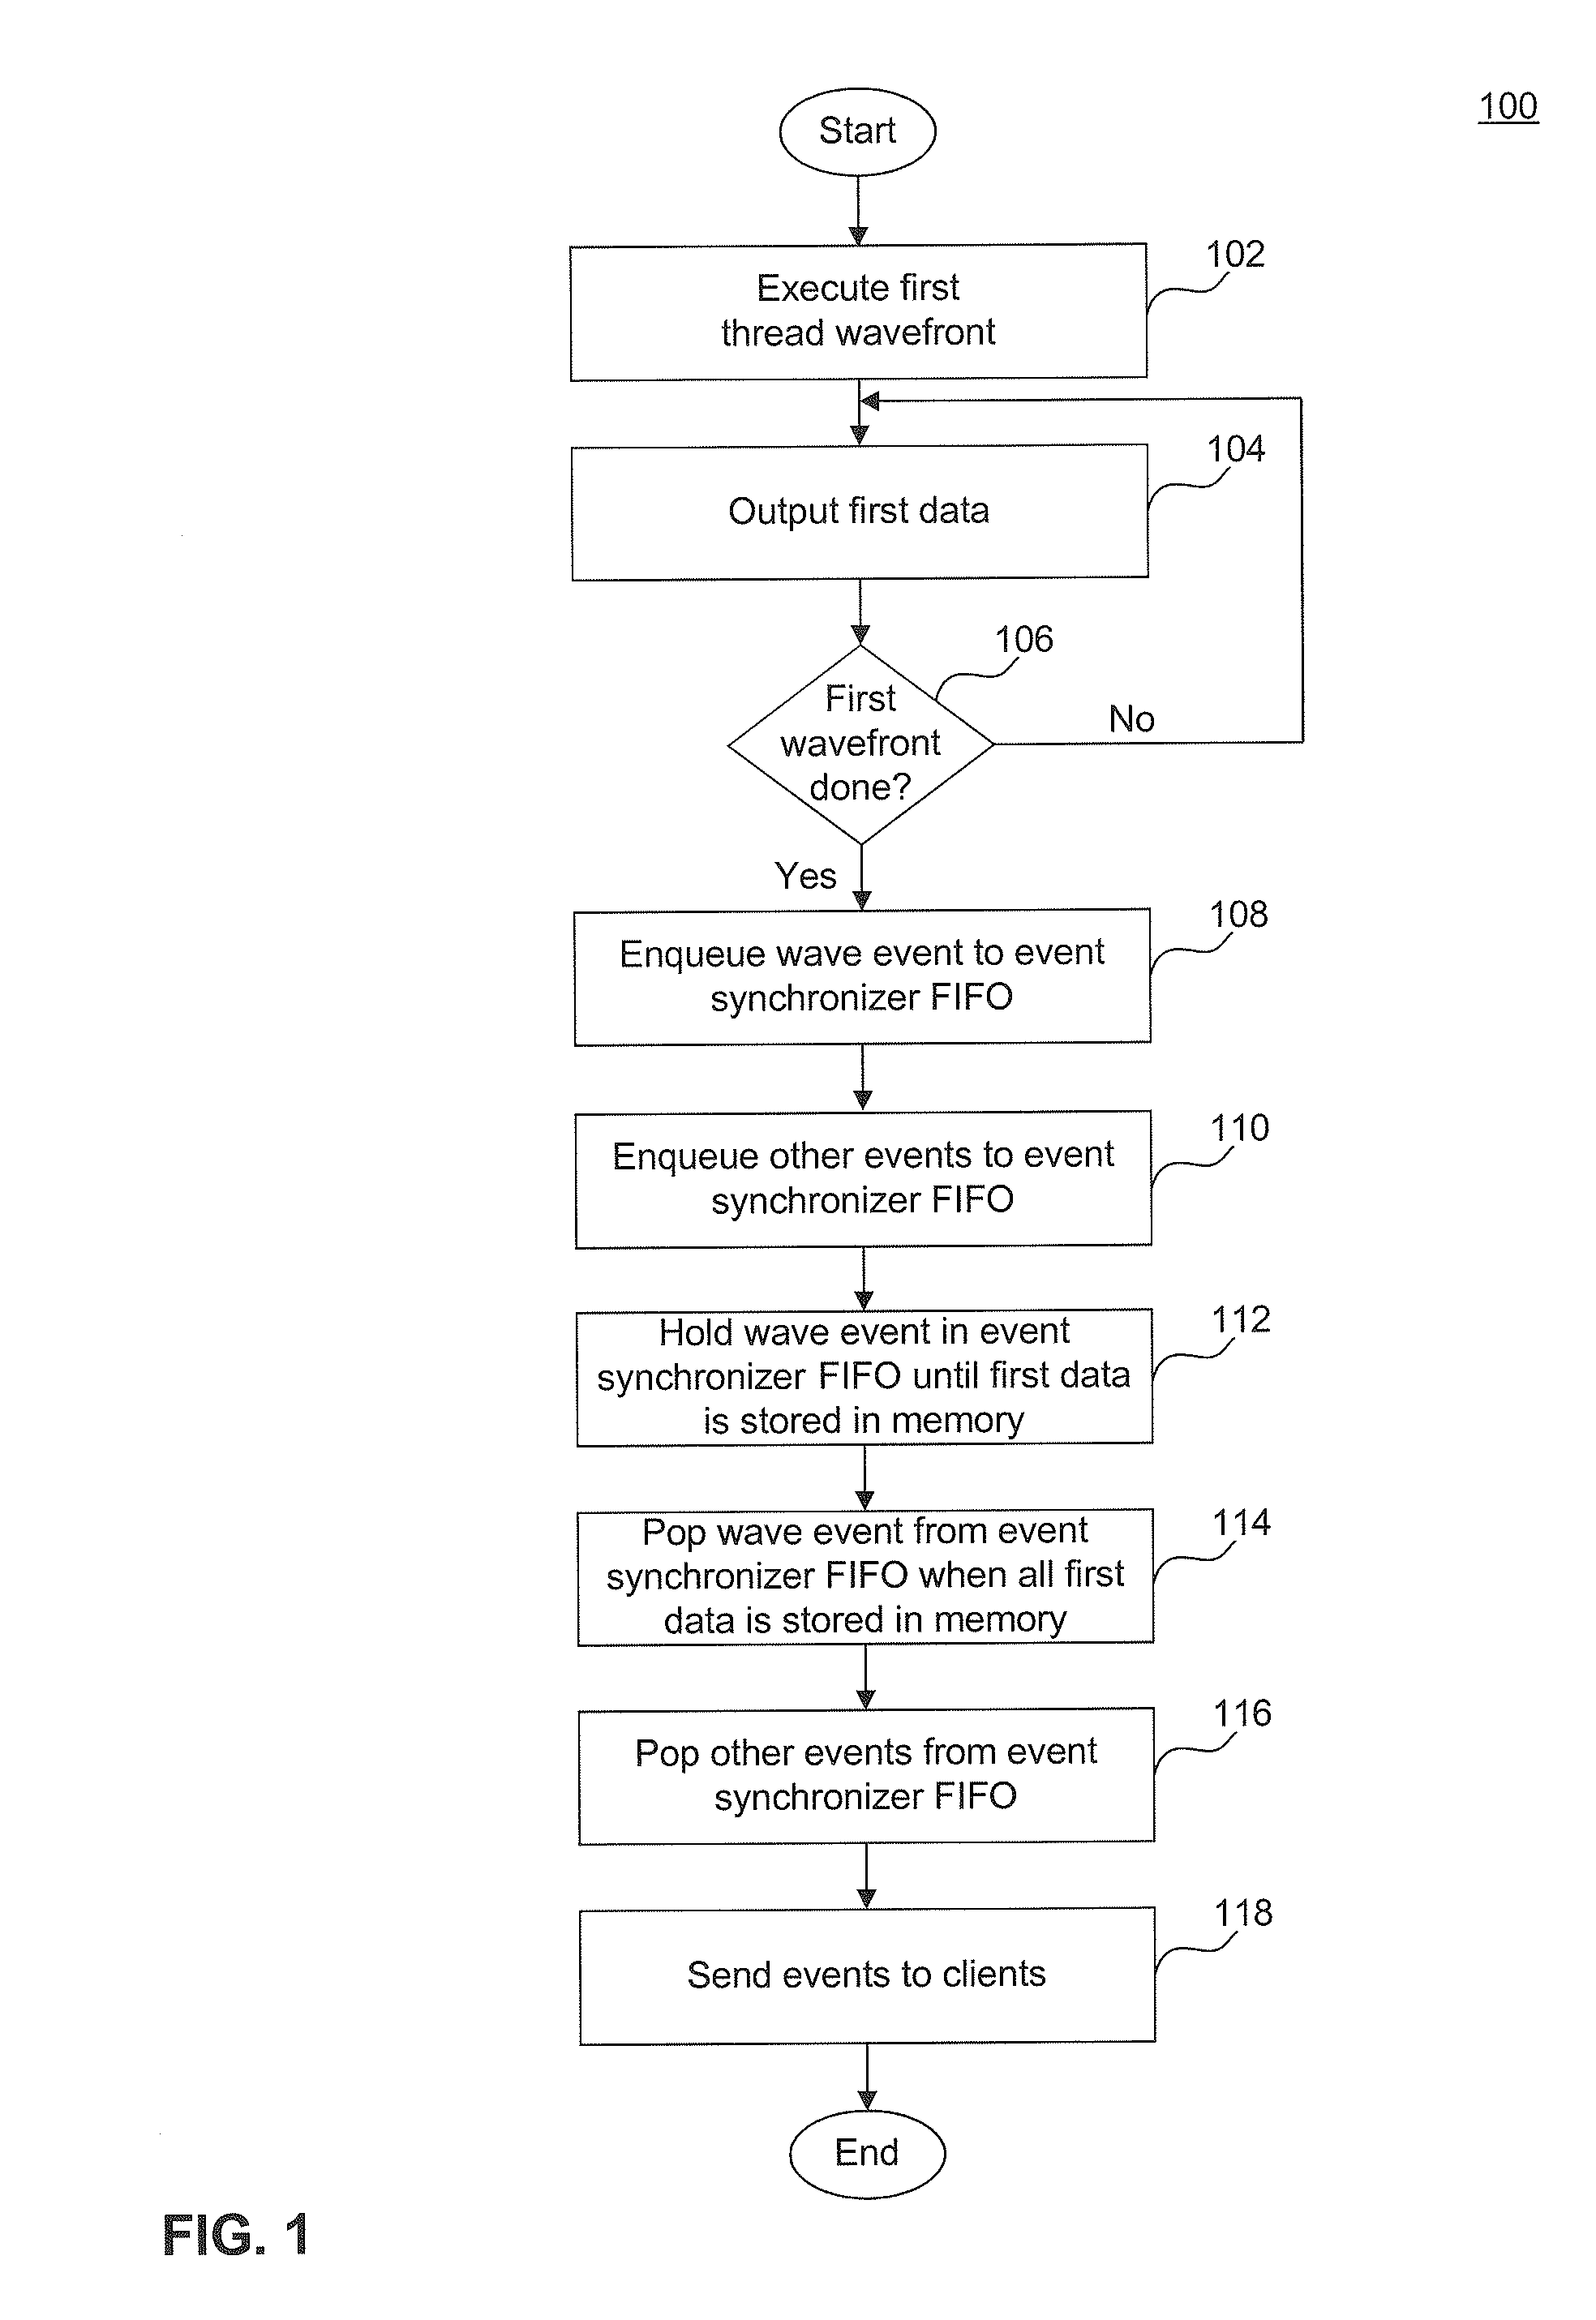 Method and System for Synchronizing Thread Wavefront Data and Events